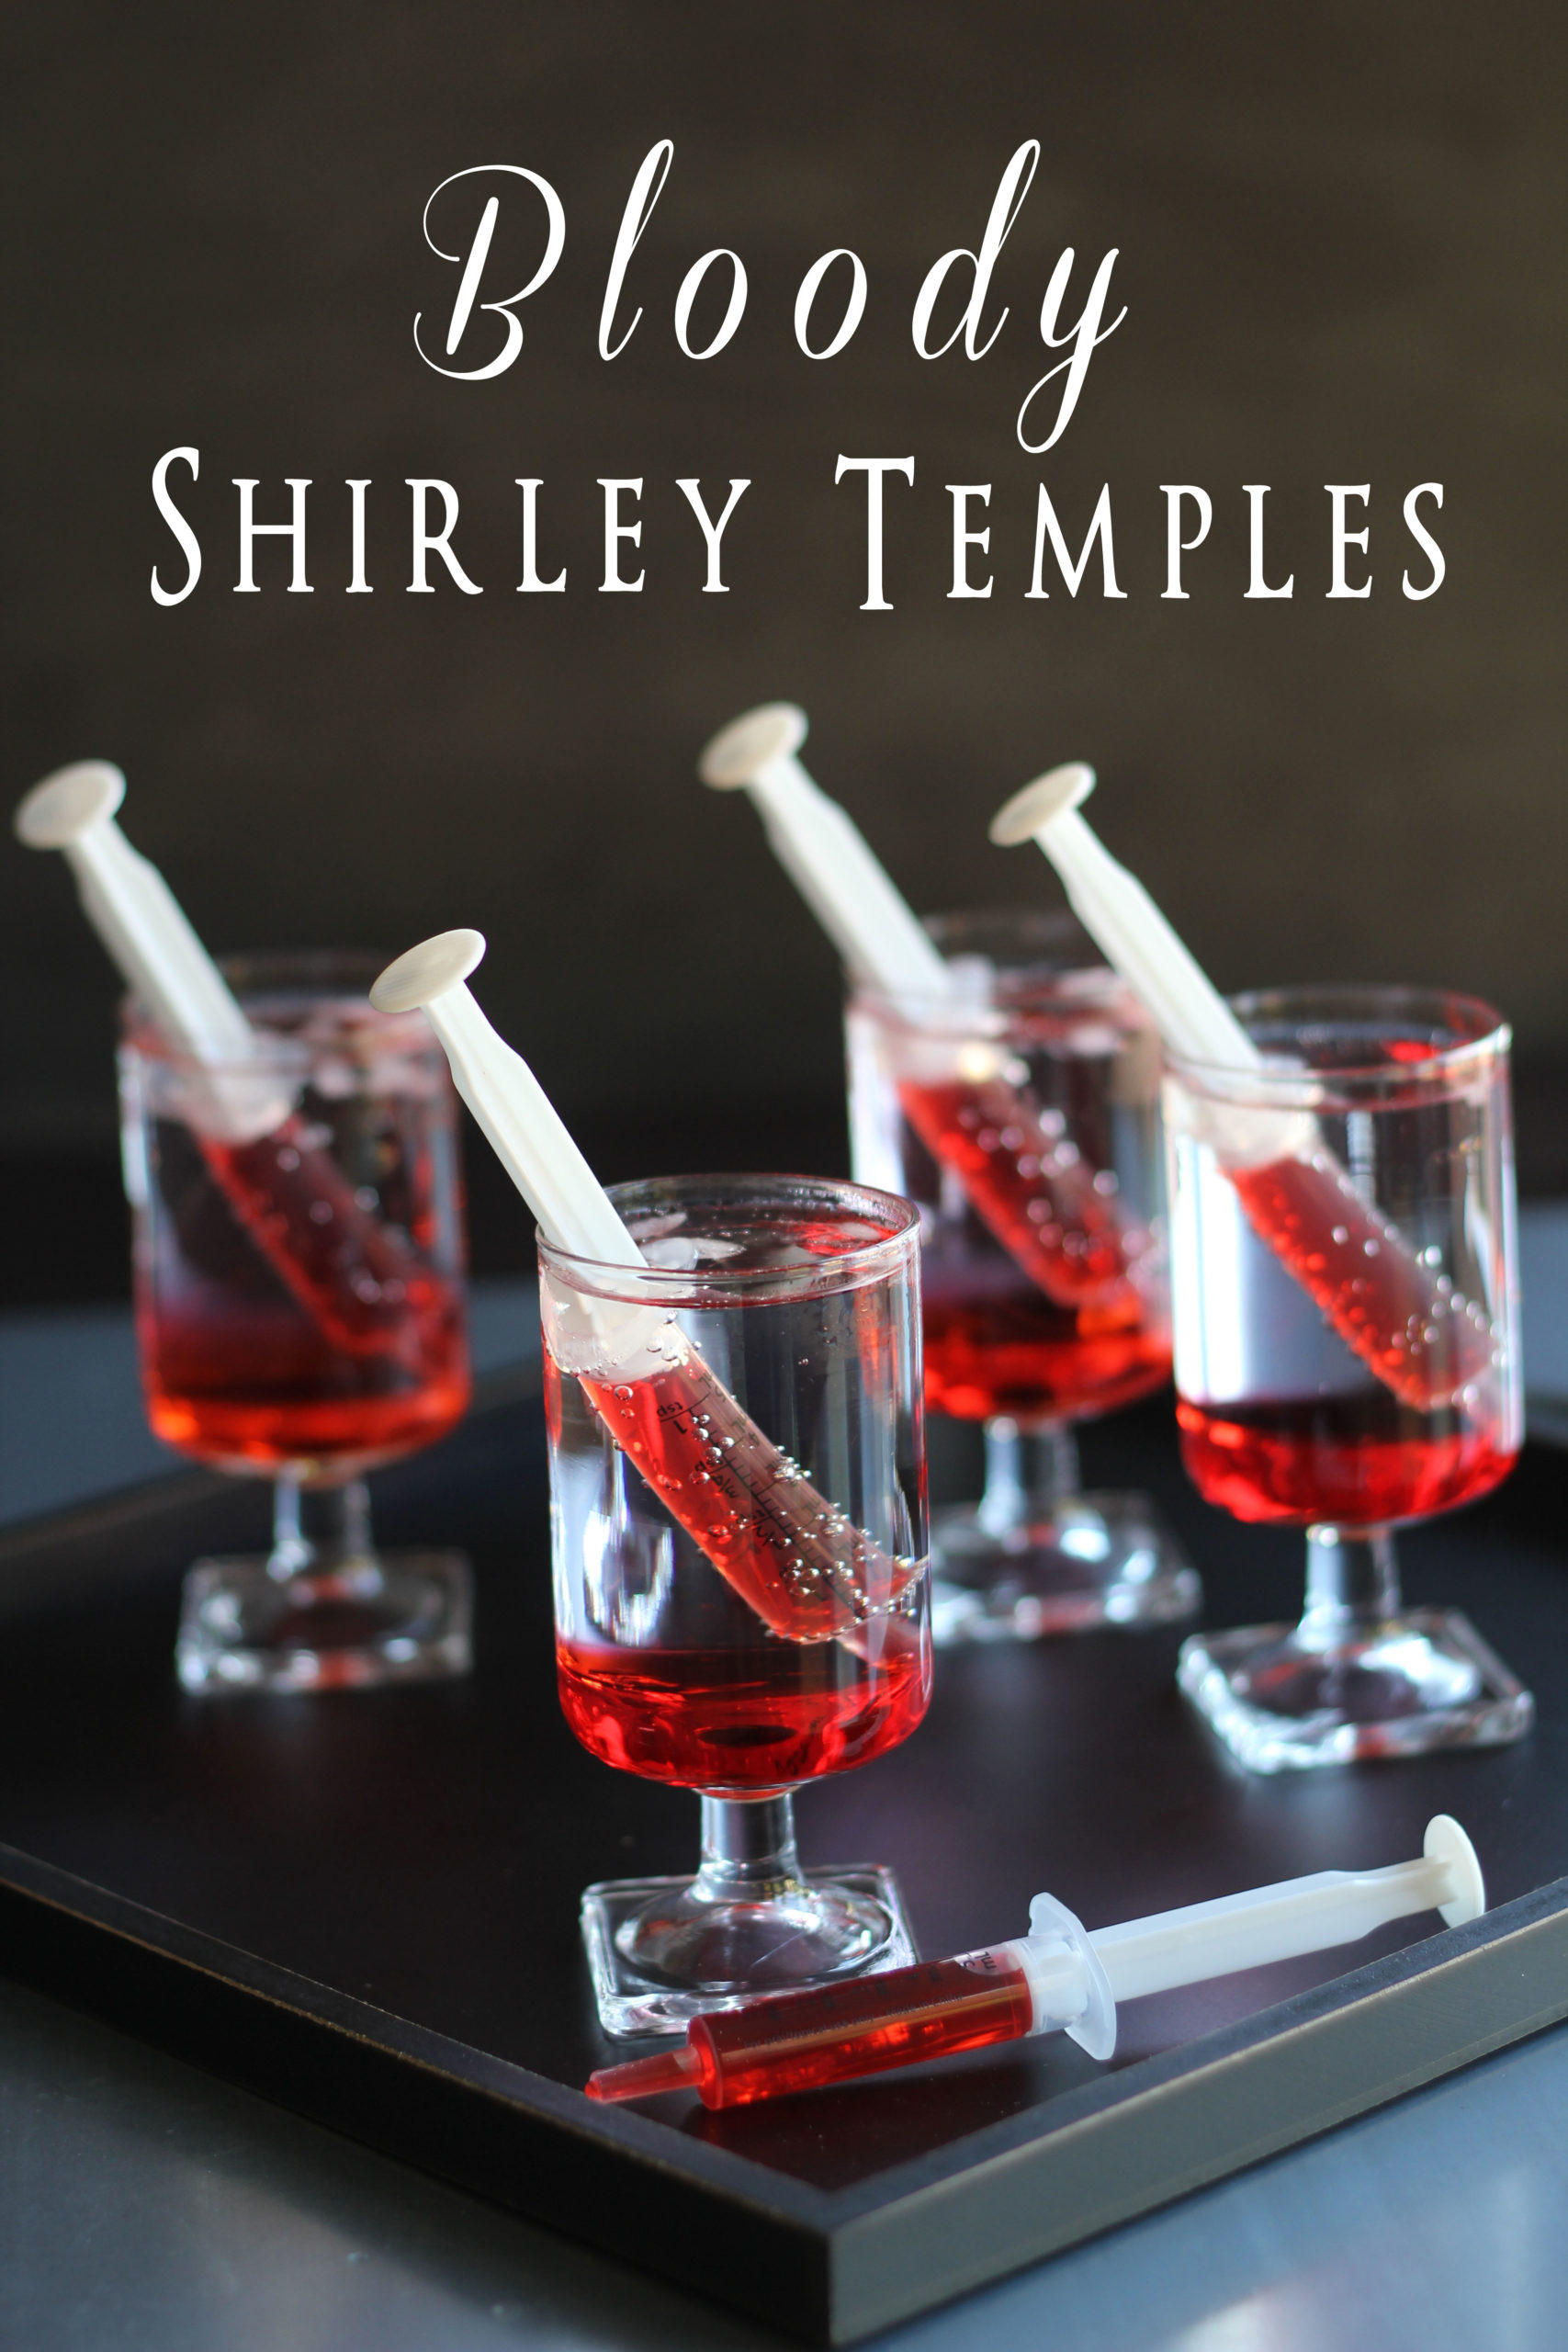 https://www.thisgrandmaisfun.com/wp-content/uploads/2013/09/Bloody-Shirley-Temples-scaled.jpg